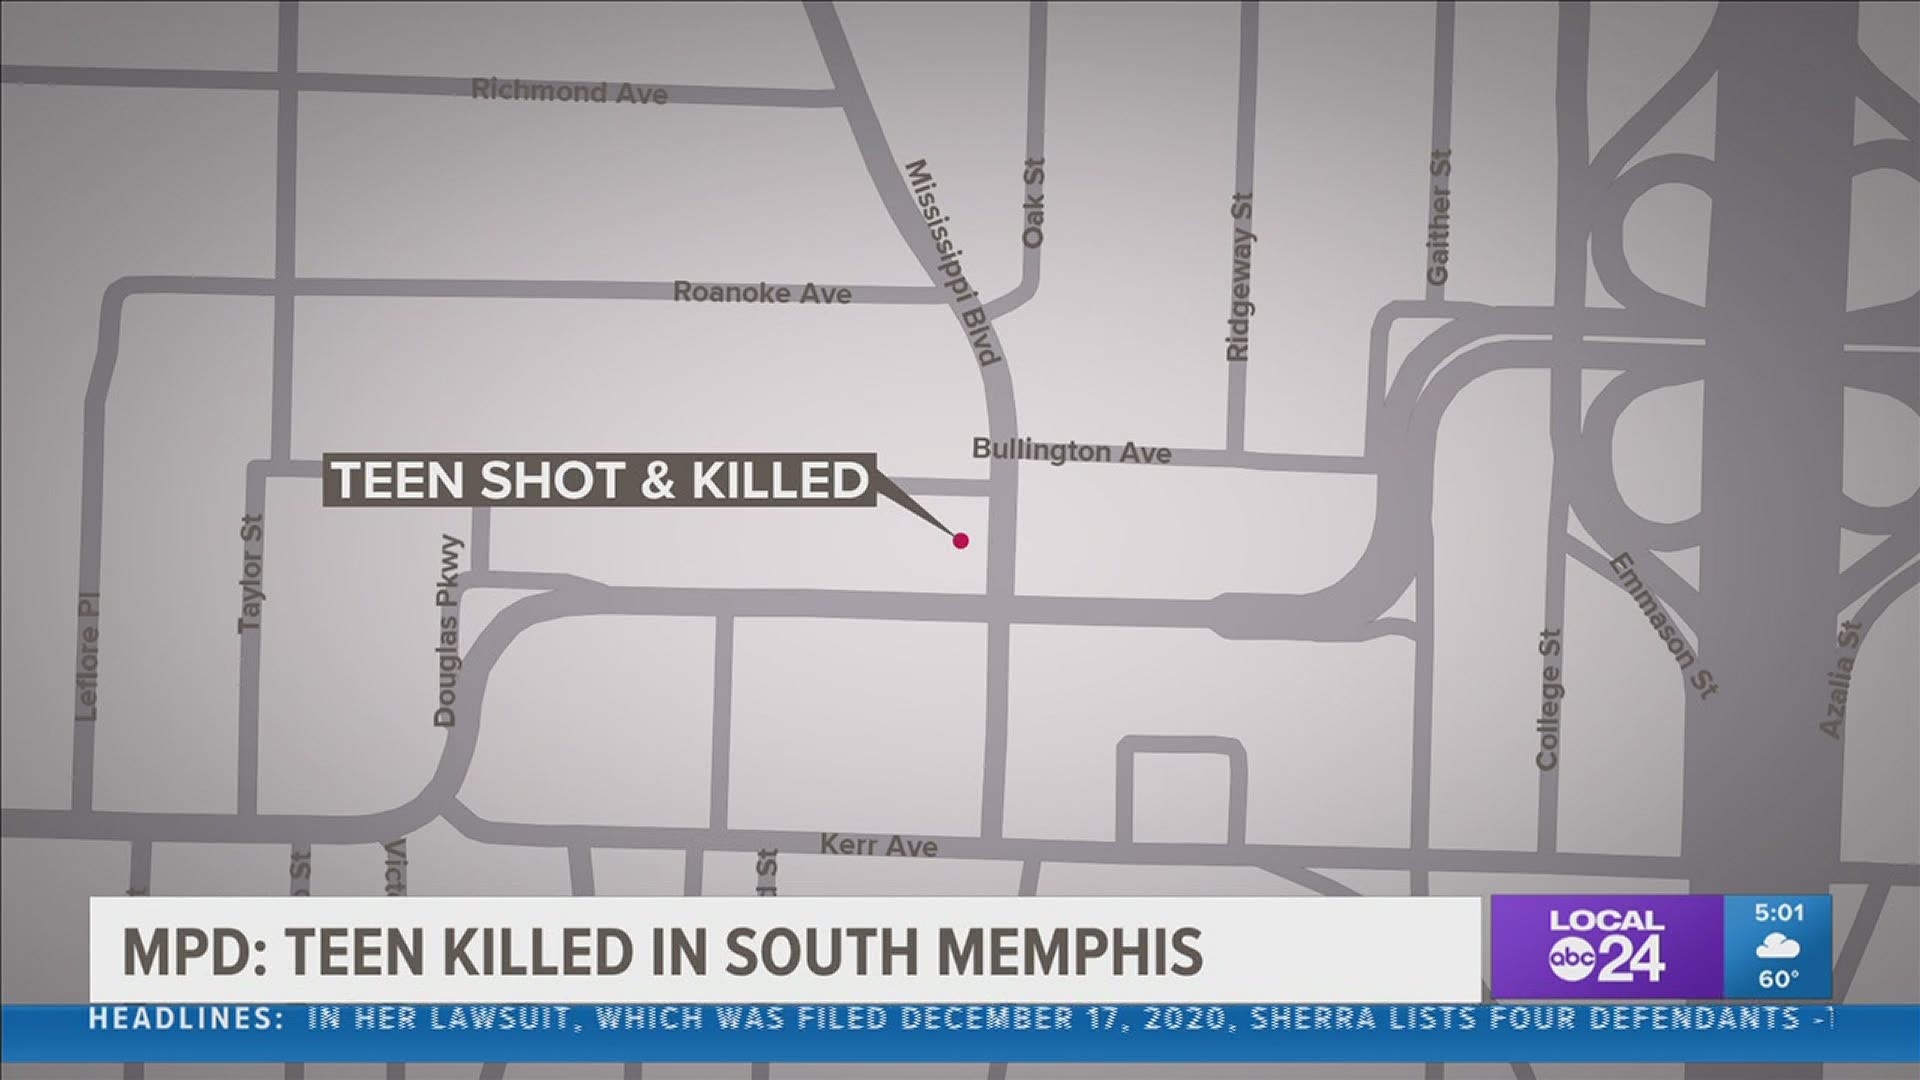 MPD says the teen was riding an ATV on Mississippi Street when a vehicle drove by firing several shots